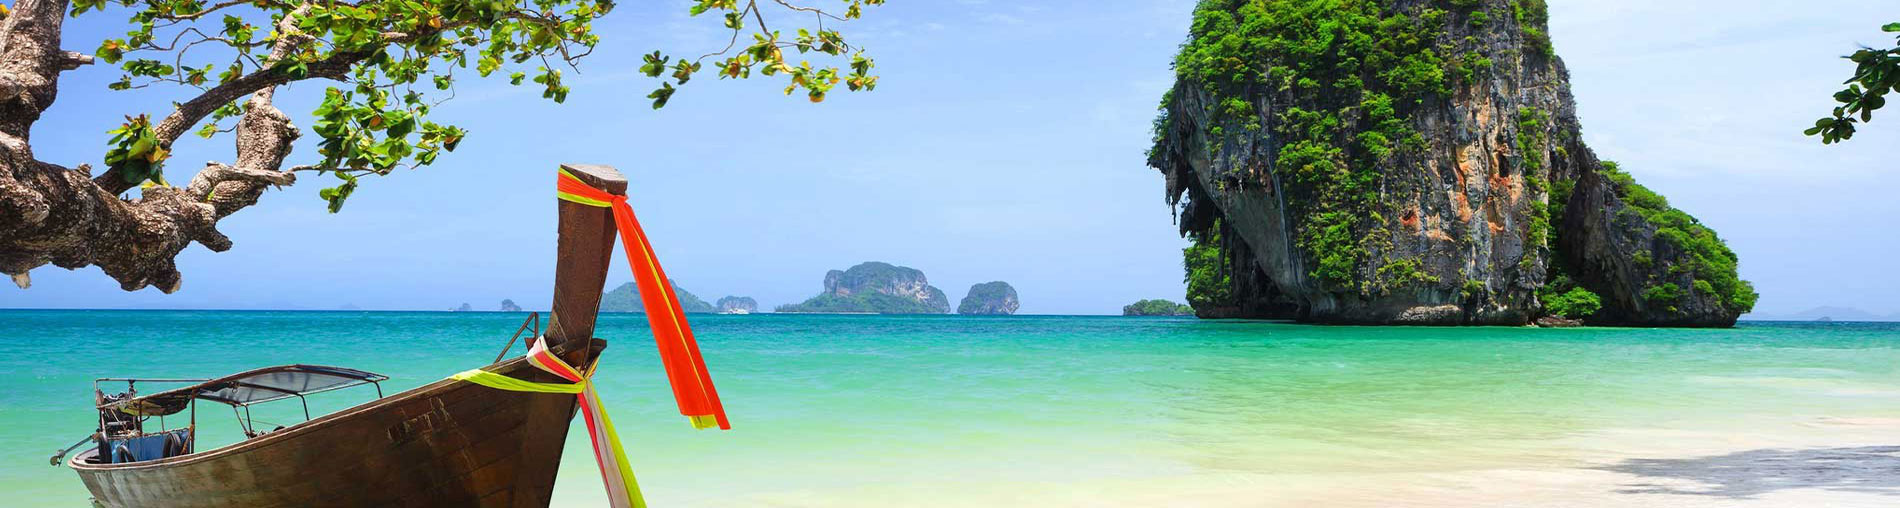 Thailand Holiday Package - 6 Nights